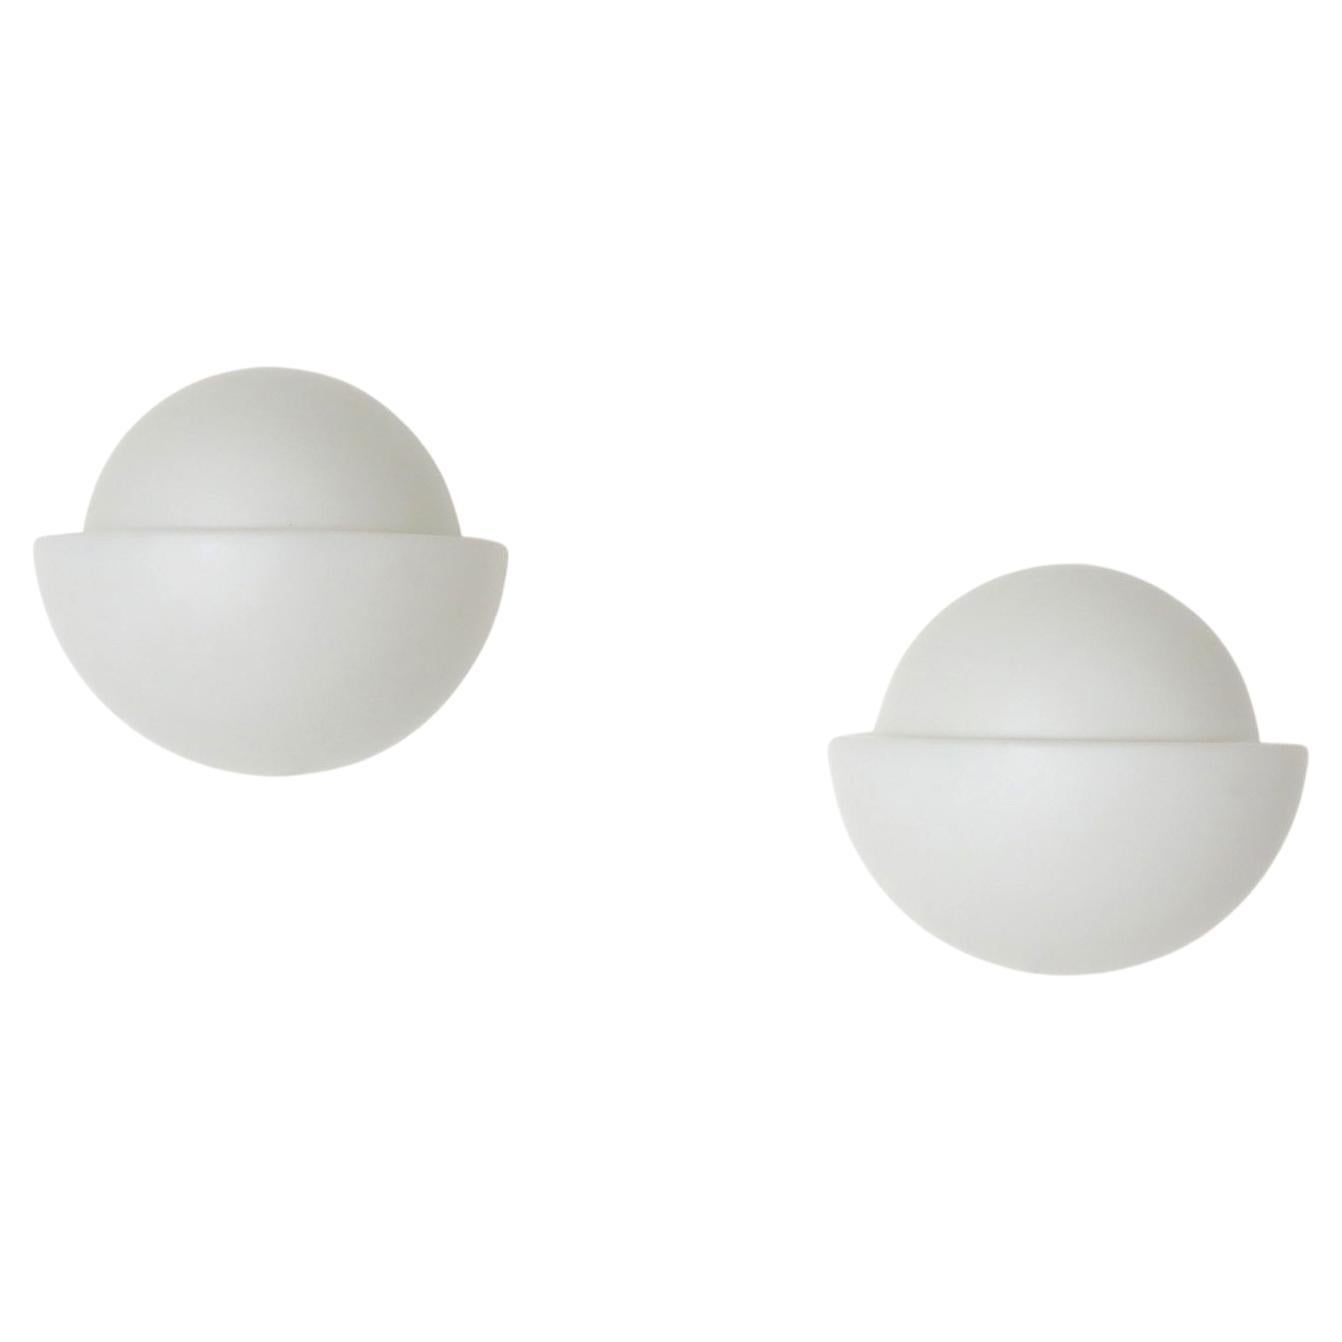 RAAK P-1412 Sculptural Milk Glass Wall Sconce by Sergio Asti, 1960s For Sale